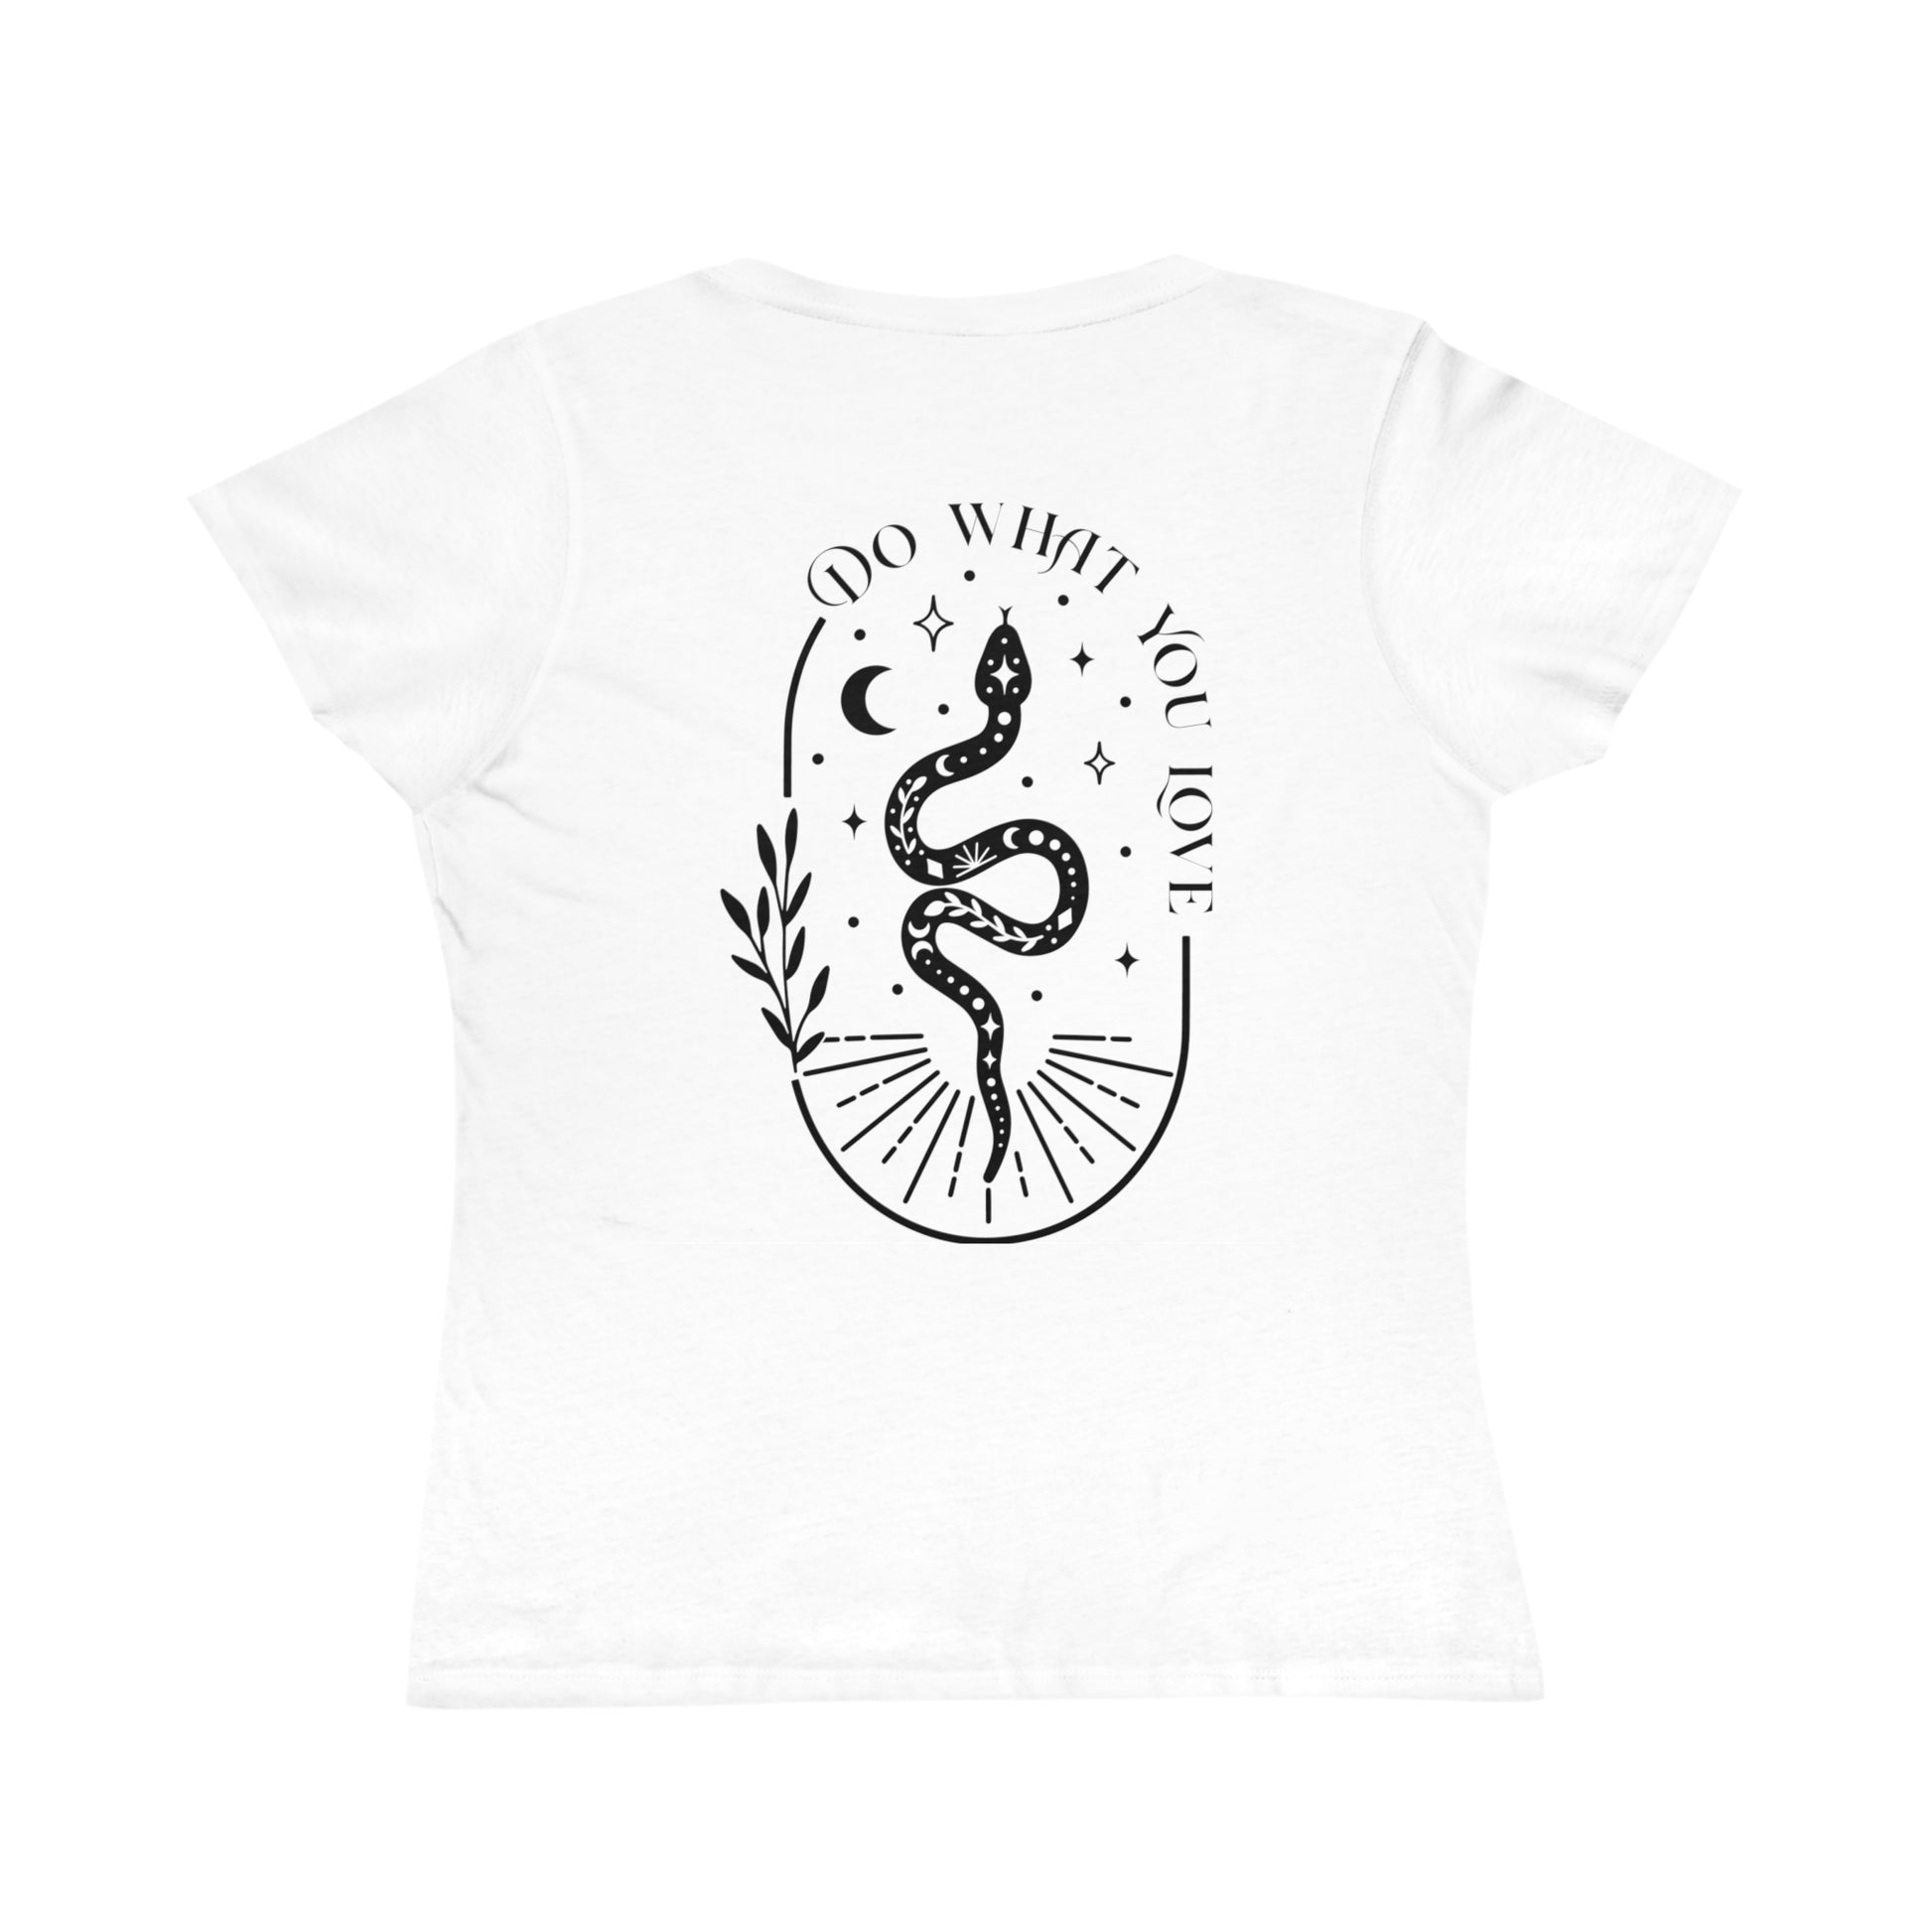 Organic Women's Do What You Love T-Shirt - The Oracle Alchemist